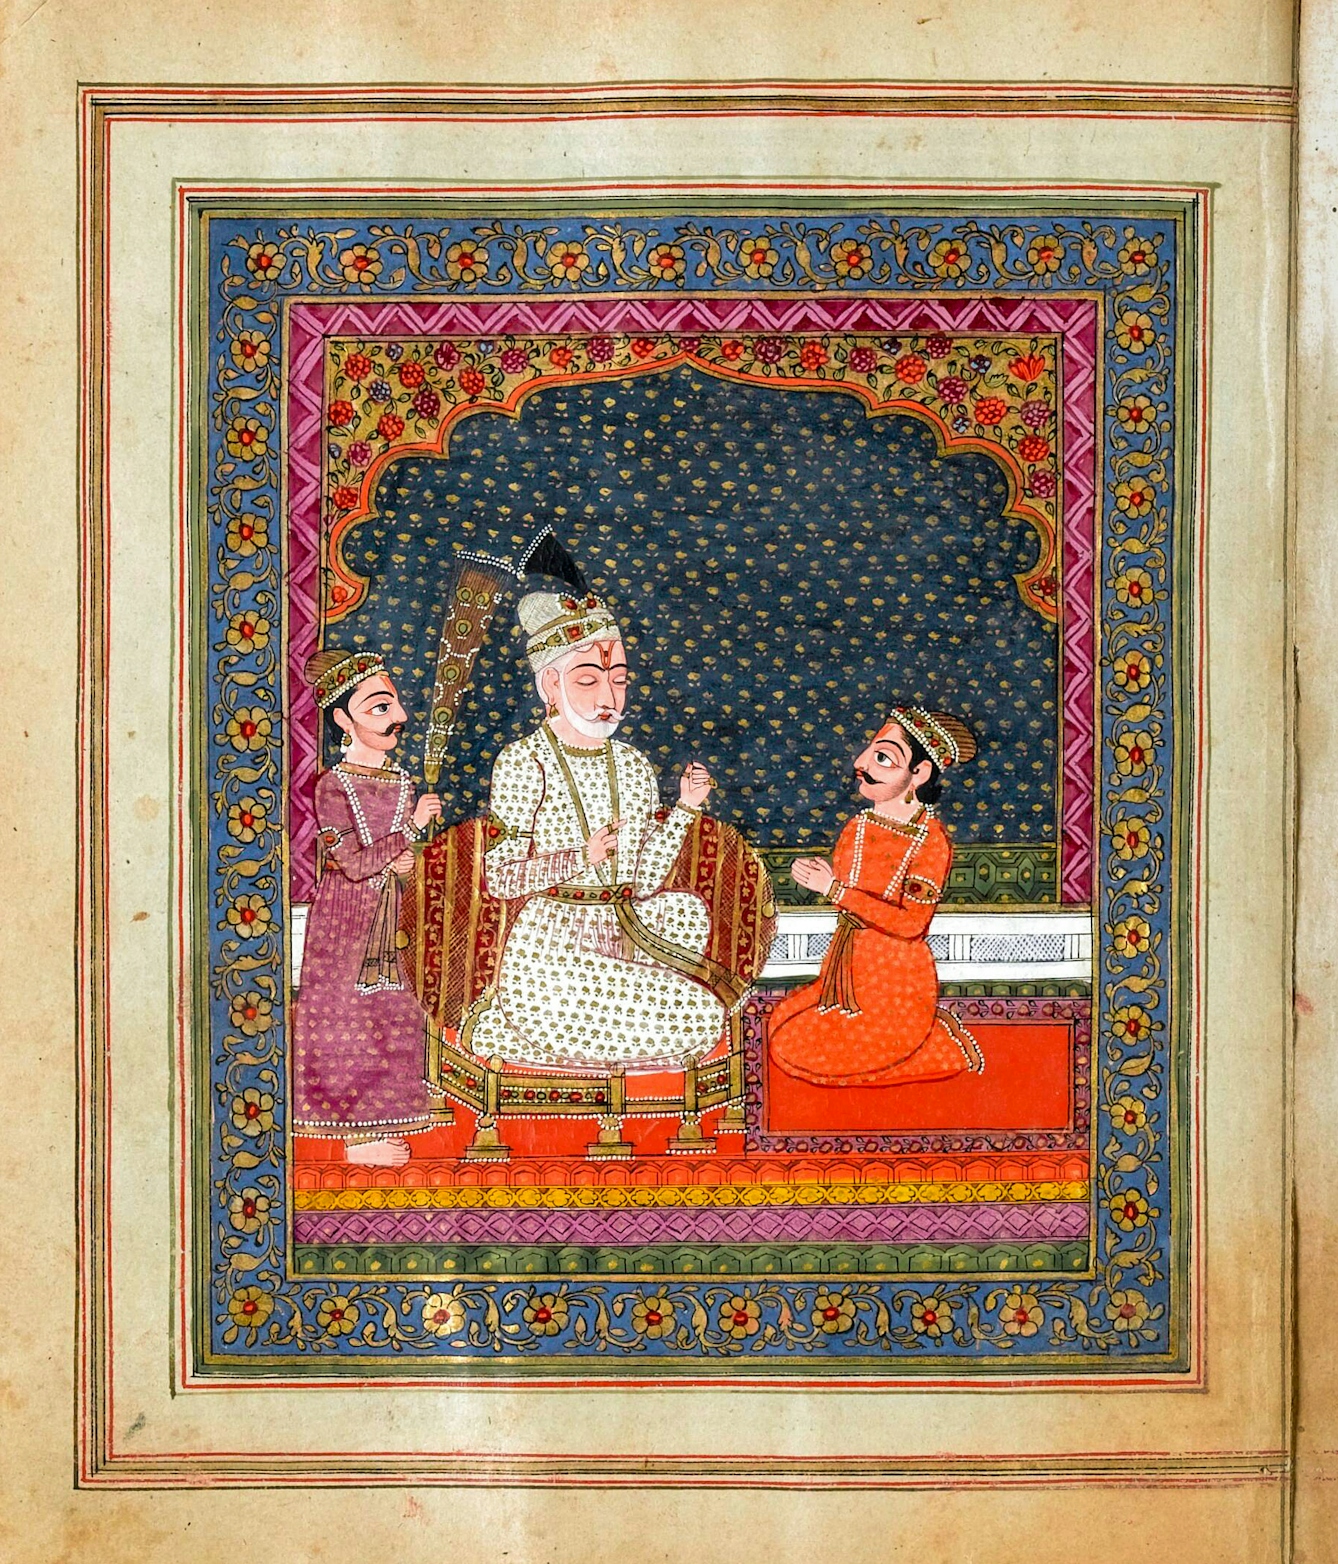 Photograph of an ornately illustrated Panjabi manuscript. The illustration is intricately detailed in vibrant colours, including reds, oranges and blues. It depicts a scene where a central character in white has his eyes closed, listening to an individual in orange, kneeling in-front of him. The central character is being fanned by an individual in purple to the left. The scene is framed by beautiful drawings of flowers and patterns.